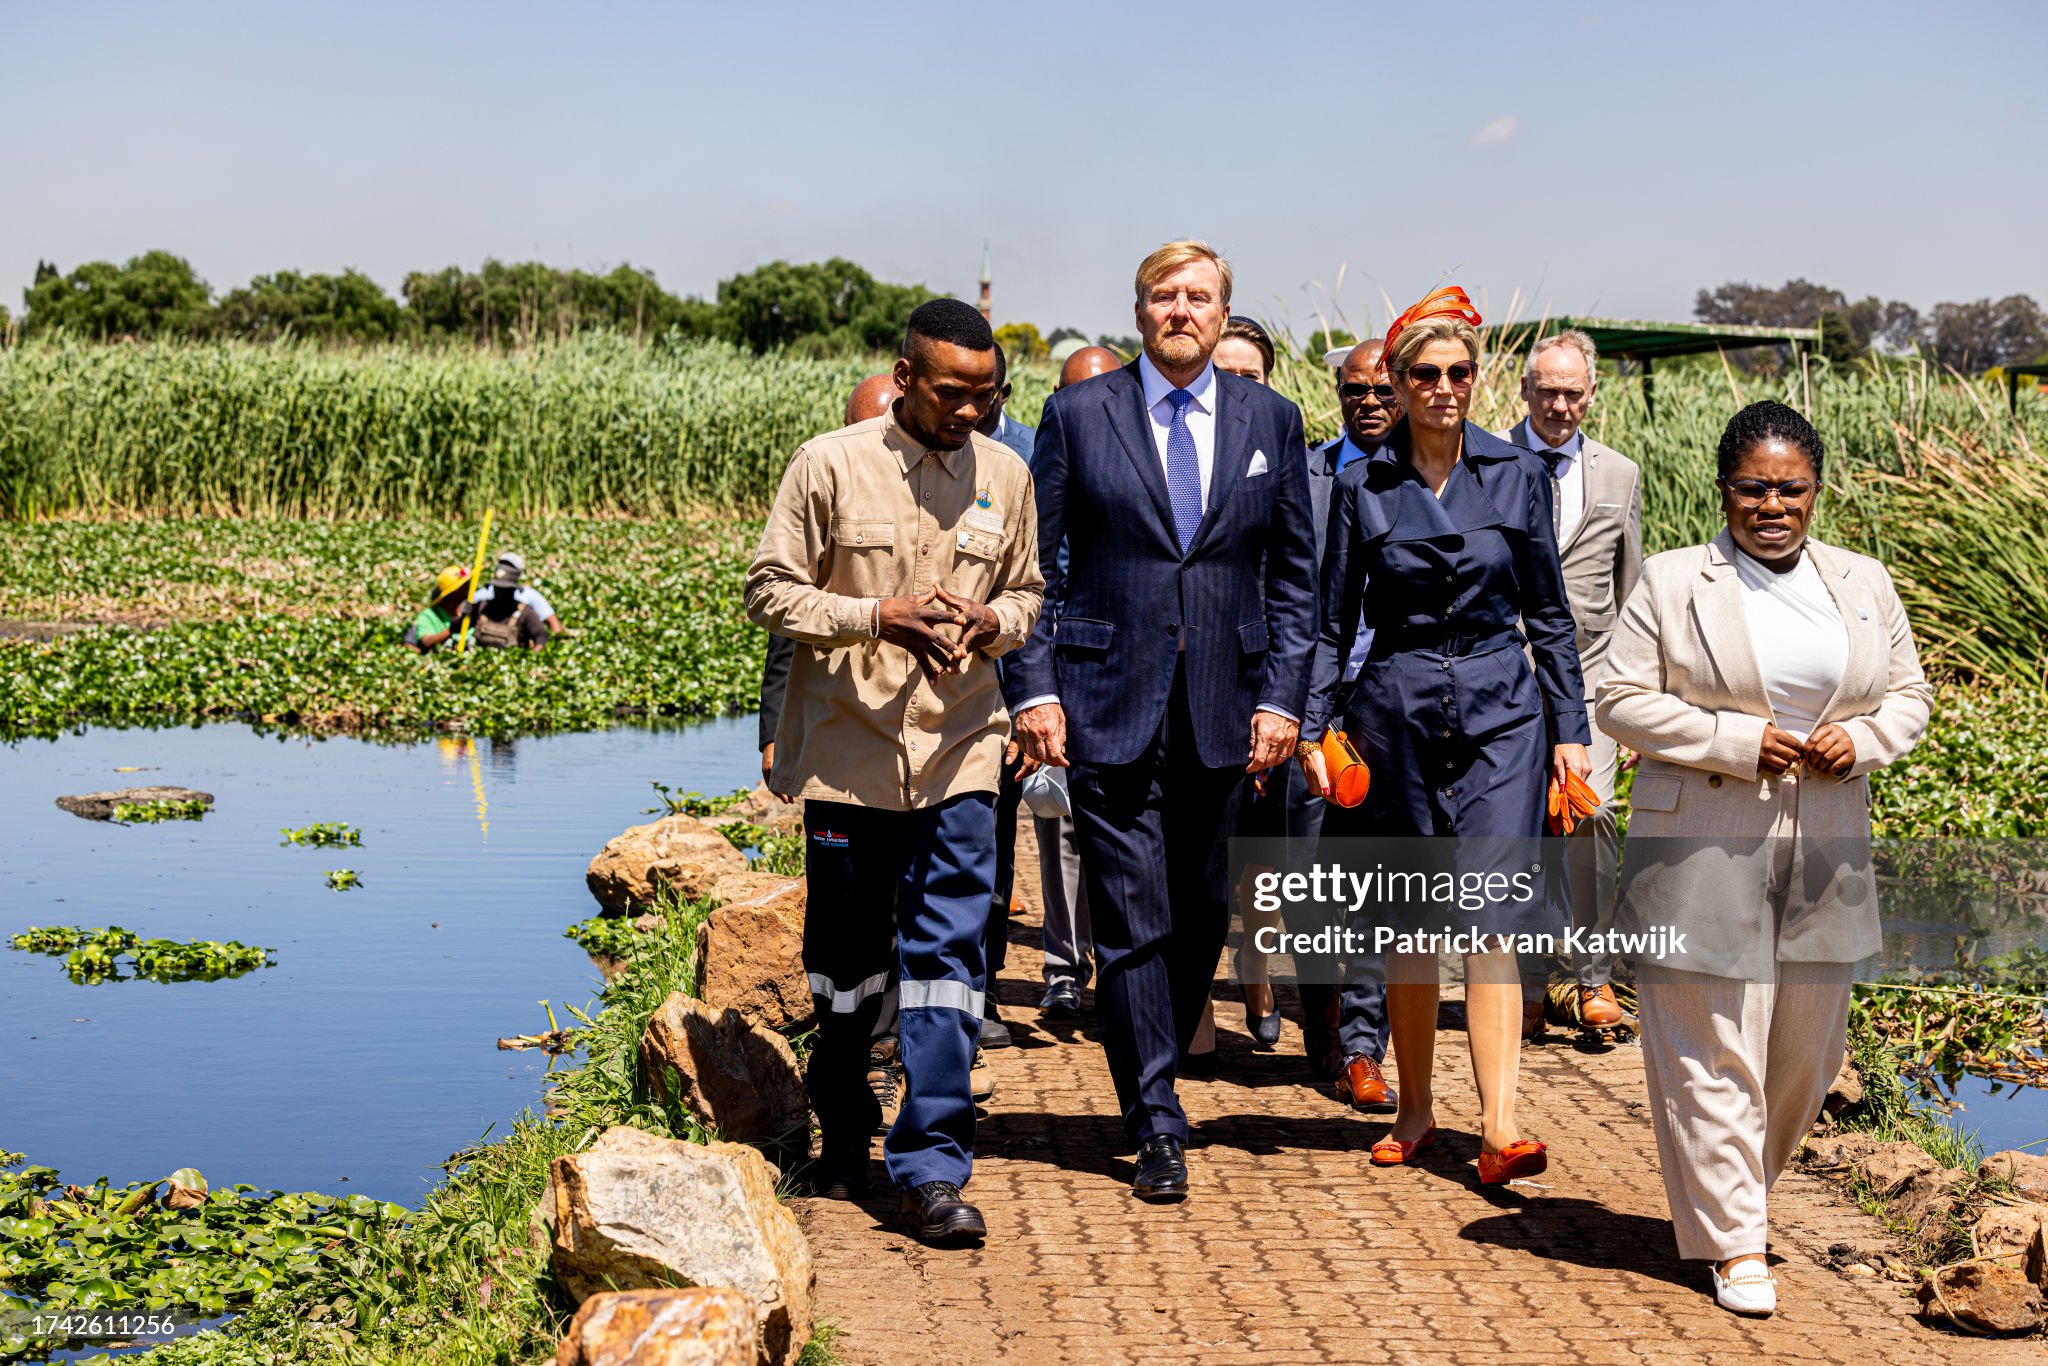 CASA REAL HOLANDESA - Página 100 King-willem-alexander-of-the-netherlands-and-queen-maxima-of-the-netherlands-visits-the